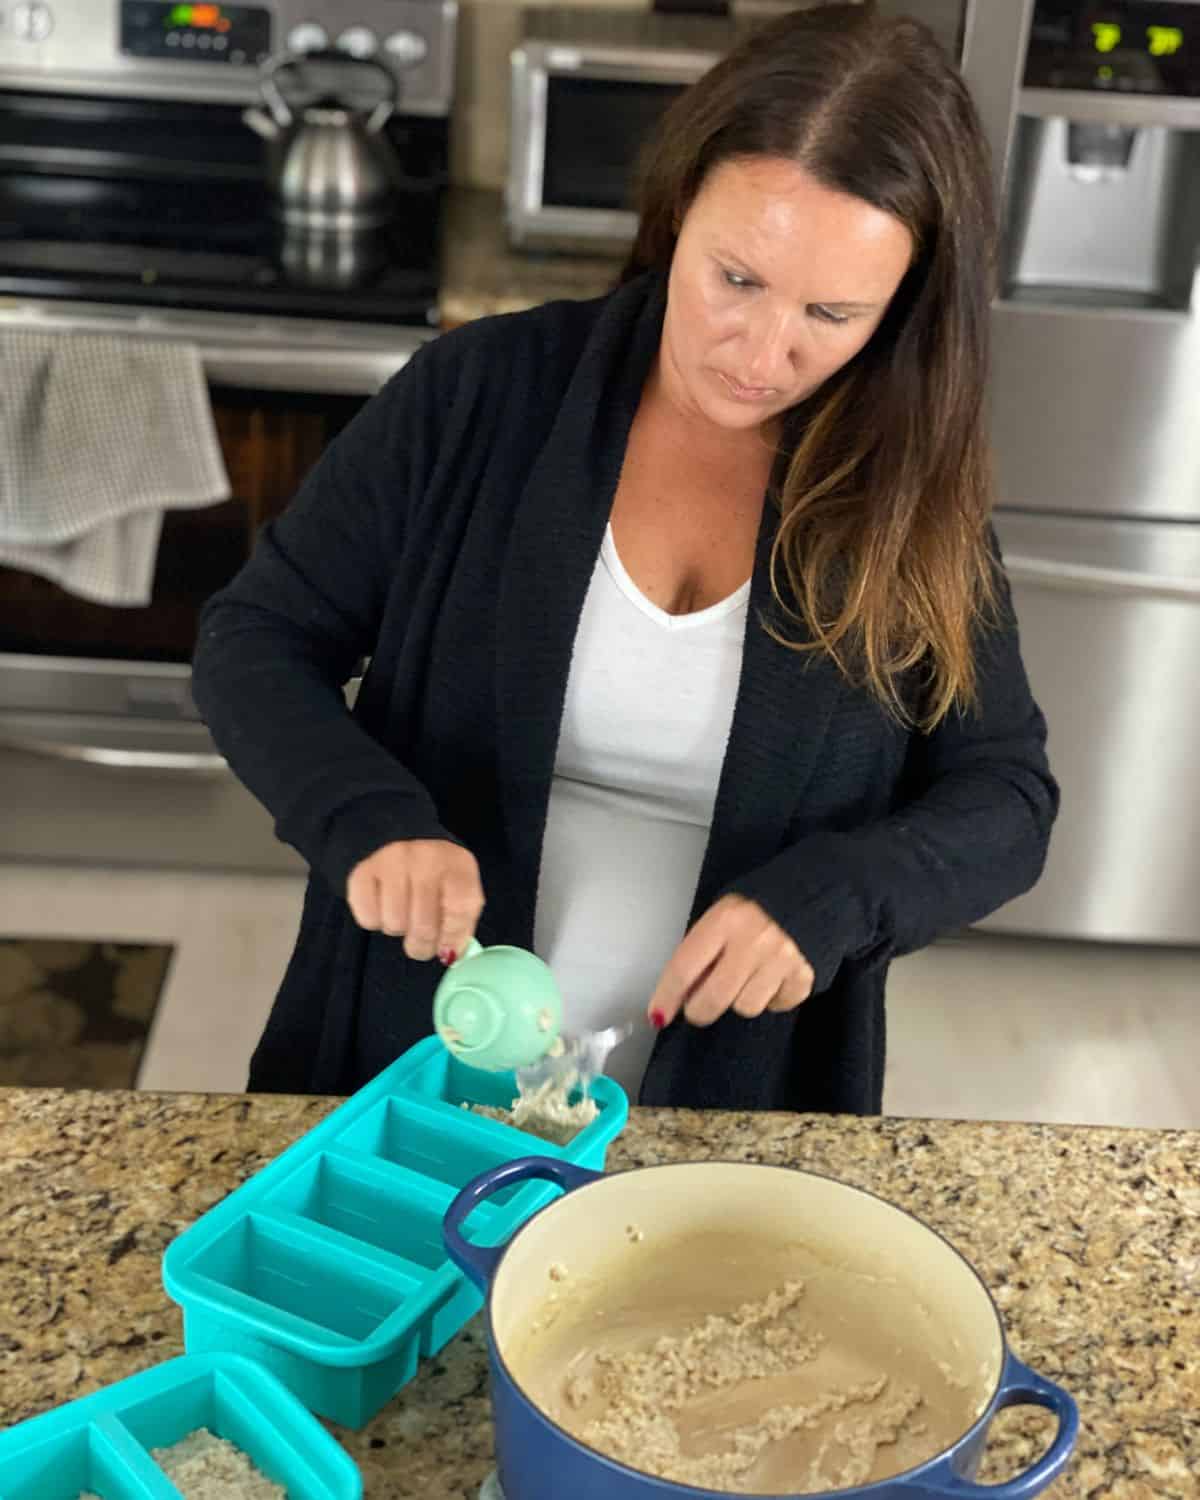 tammy placing oatmeal into souper cubes.